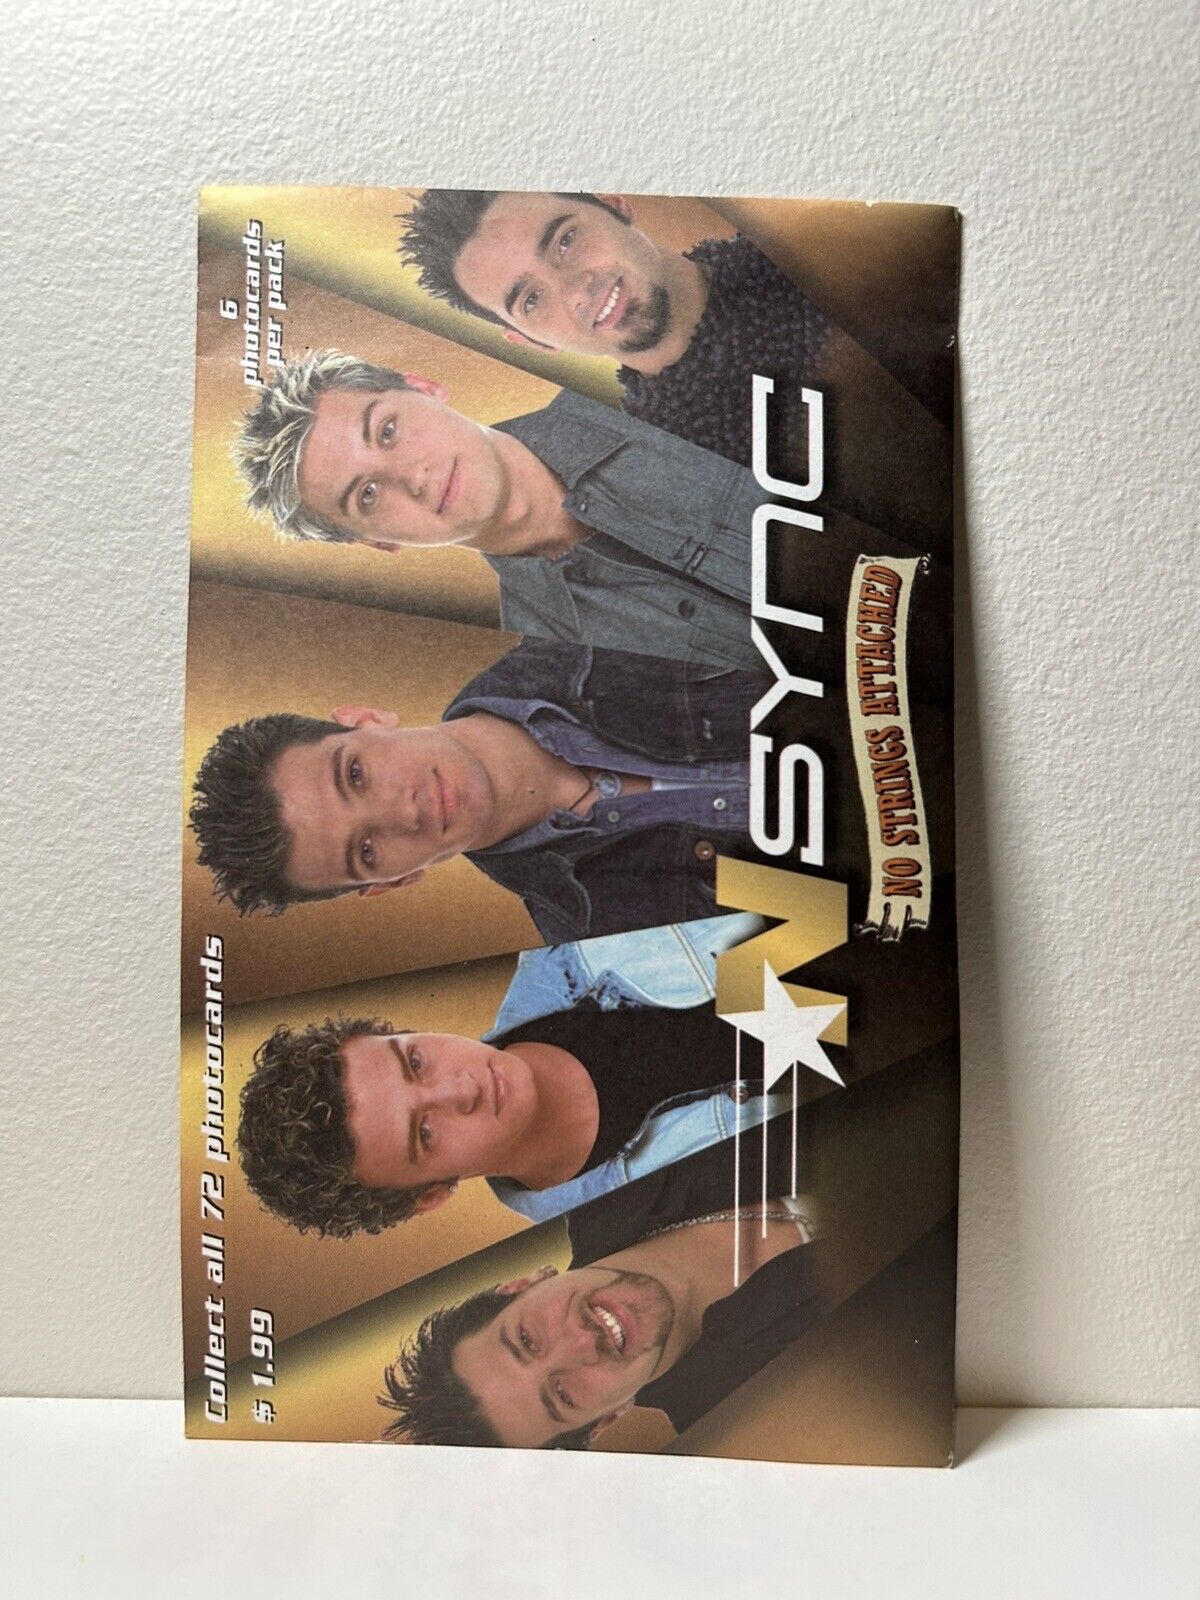 2000 Panini NSYNC - No Strings Attached Official Photocards Pack 90s Nostalgia